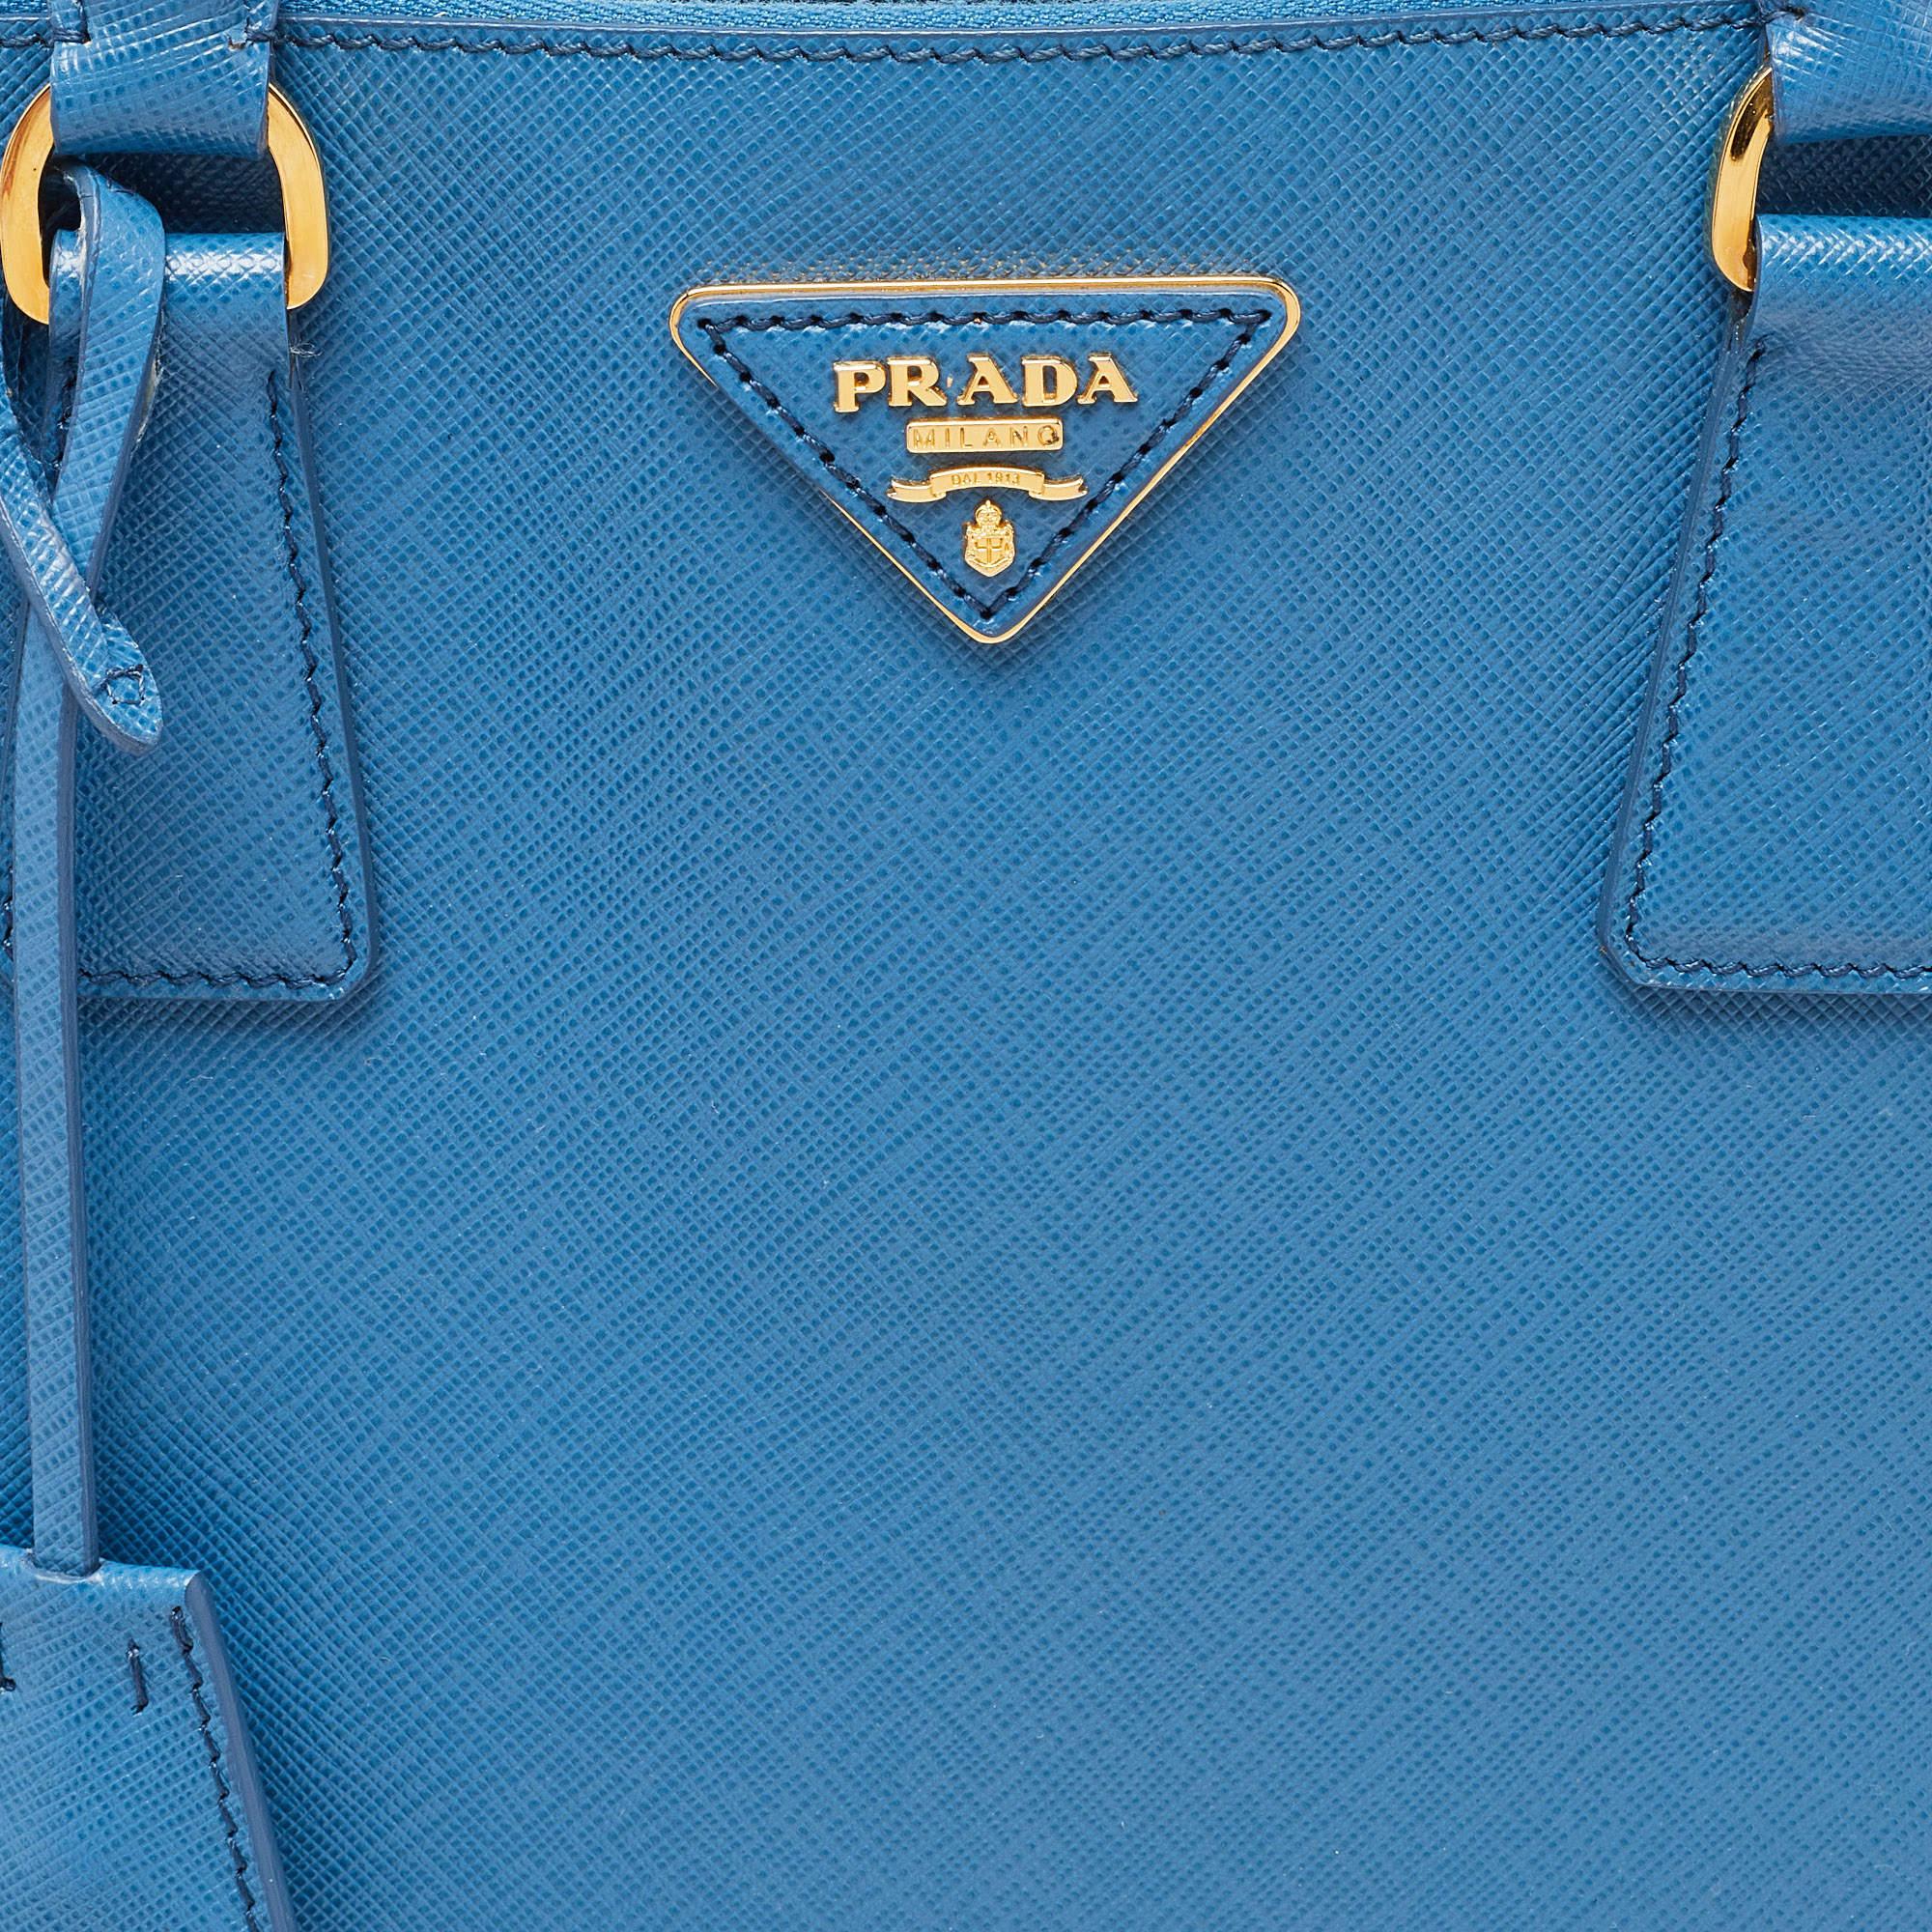 Prada Blue Saffiano Lux Leather Large Galleria Double Zip Tote For Sale 5